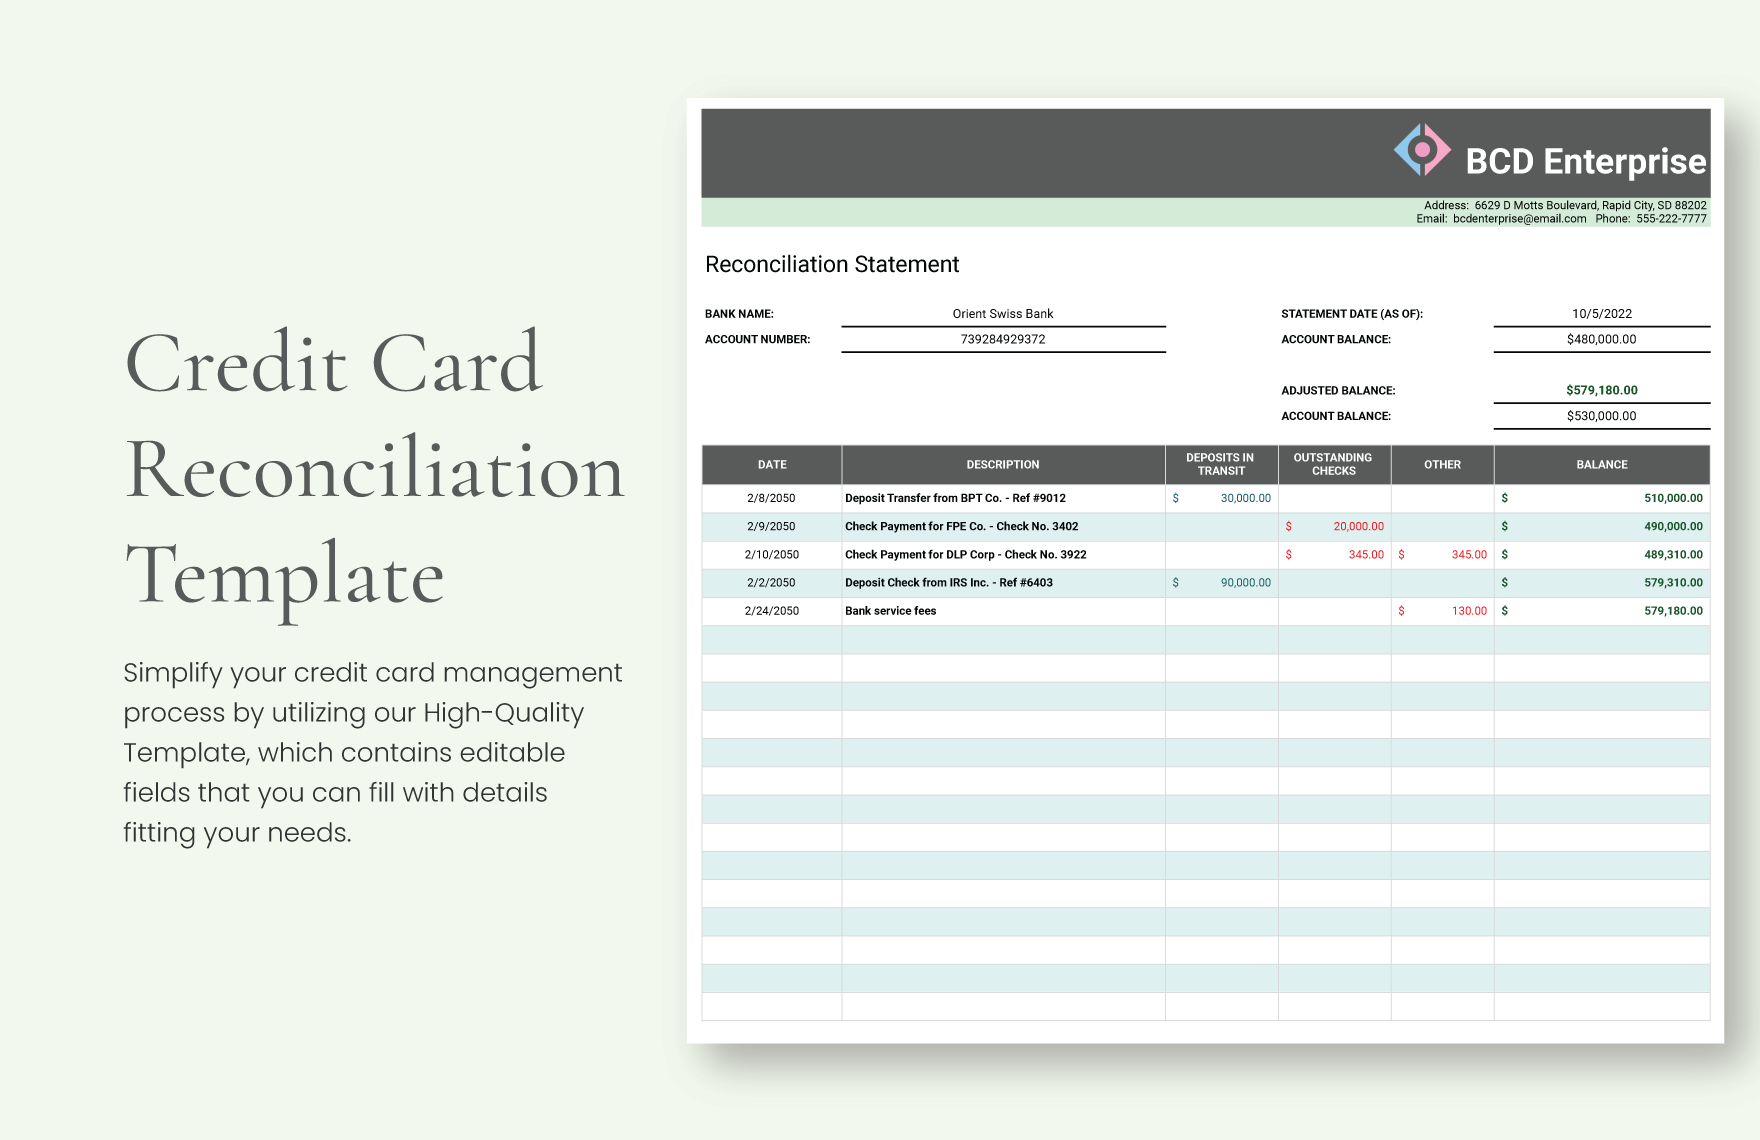 Credit Card Reconciliation Template Google Sheets, Excel